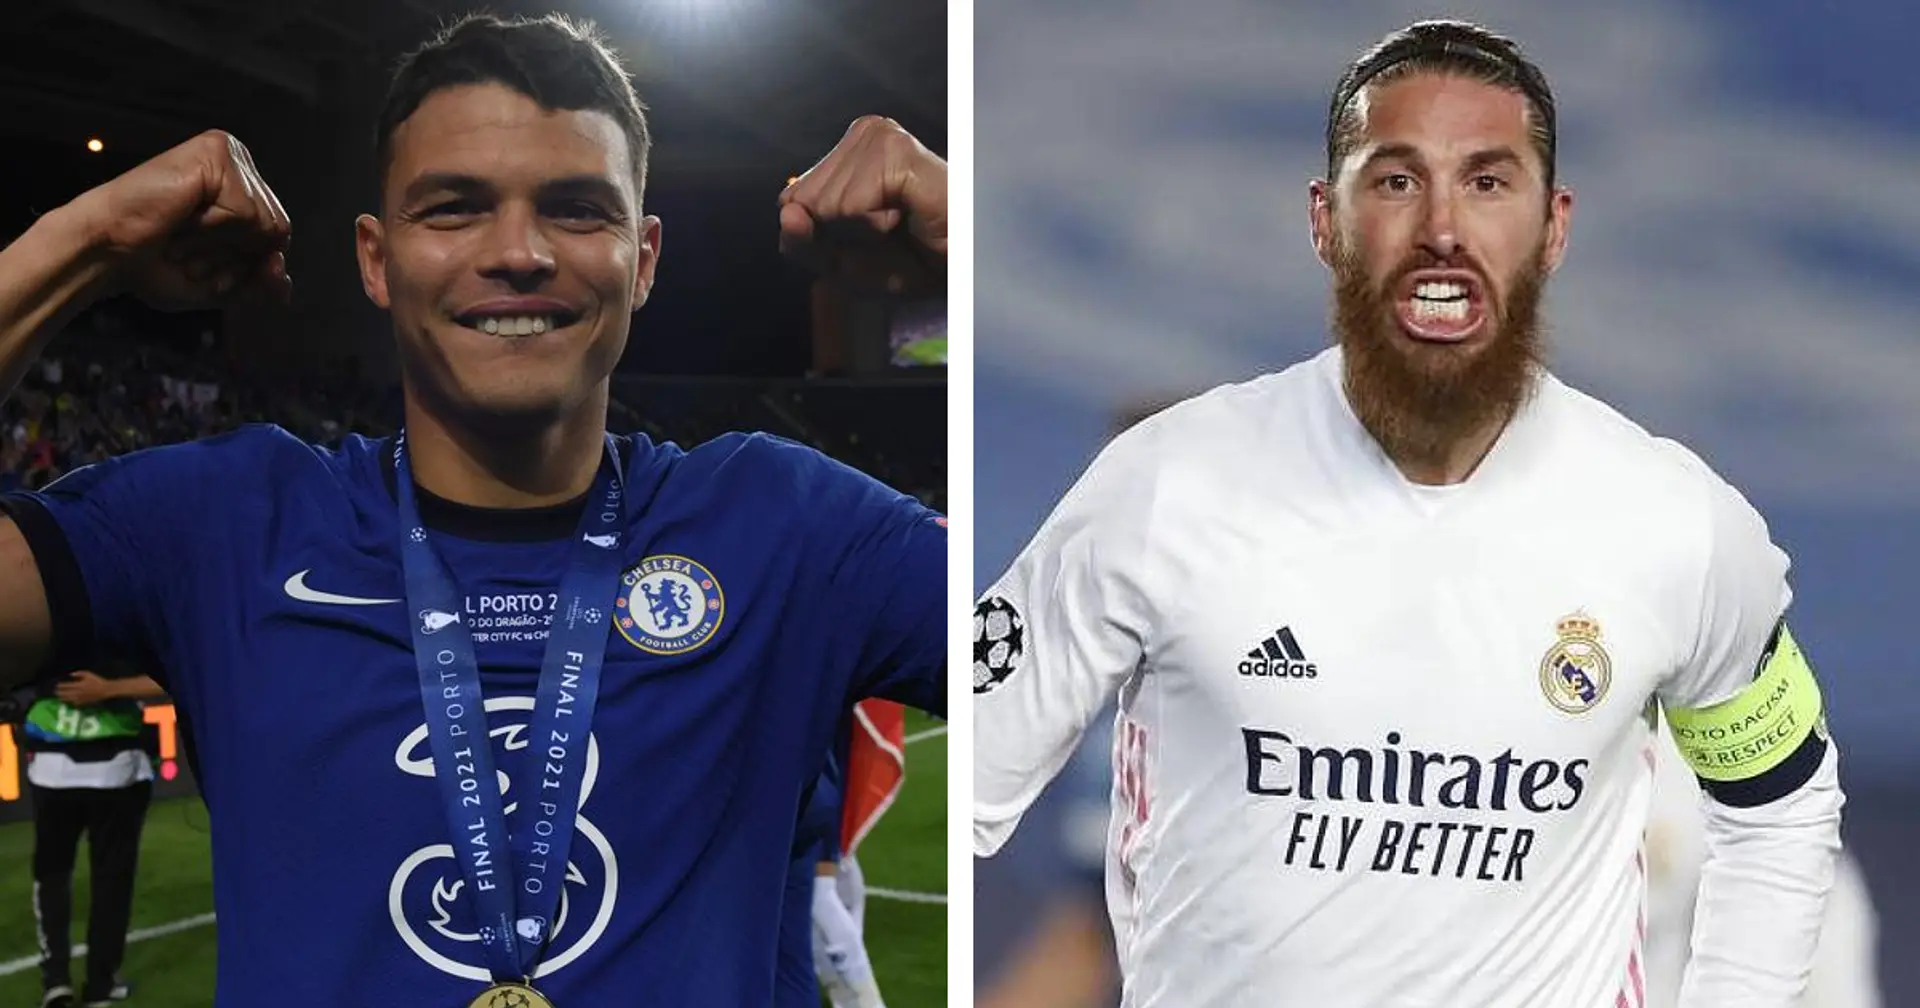 'Look what Thiago Silva did at Chelsea': Man United fans delighted as Sergio Ramos leaves Real Madrid 